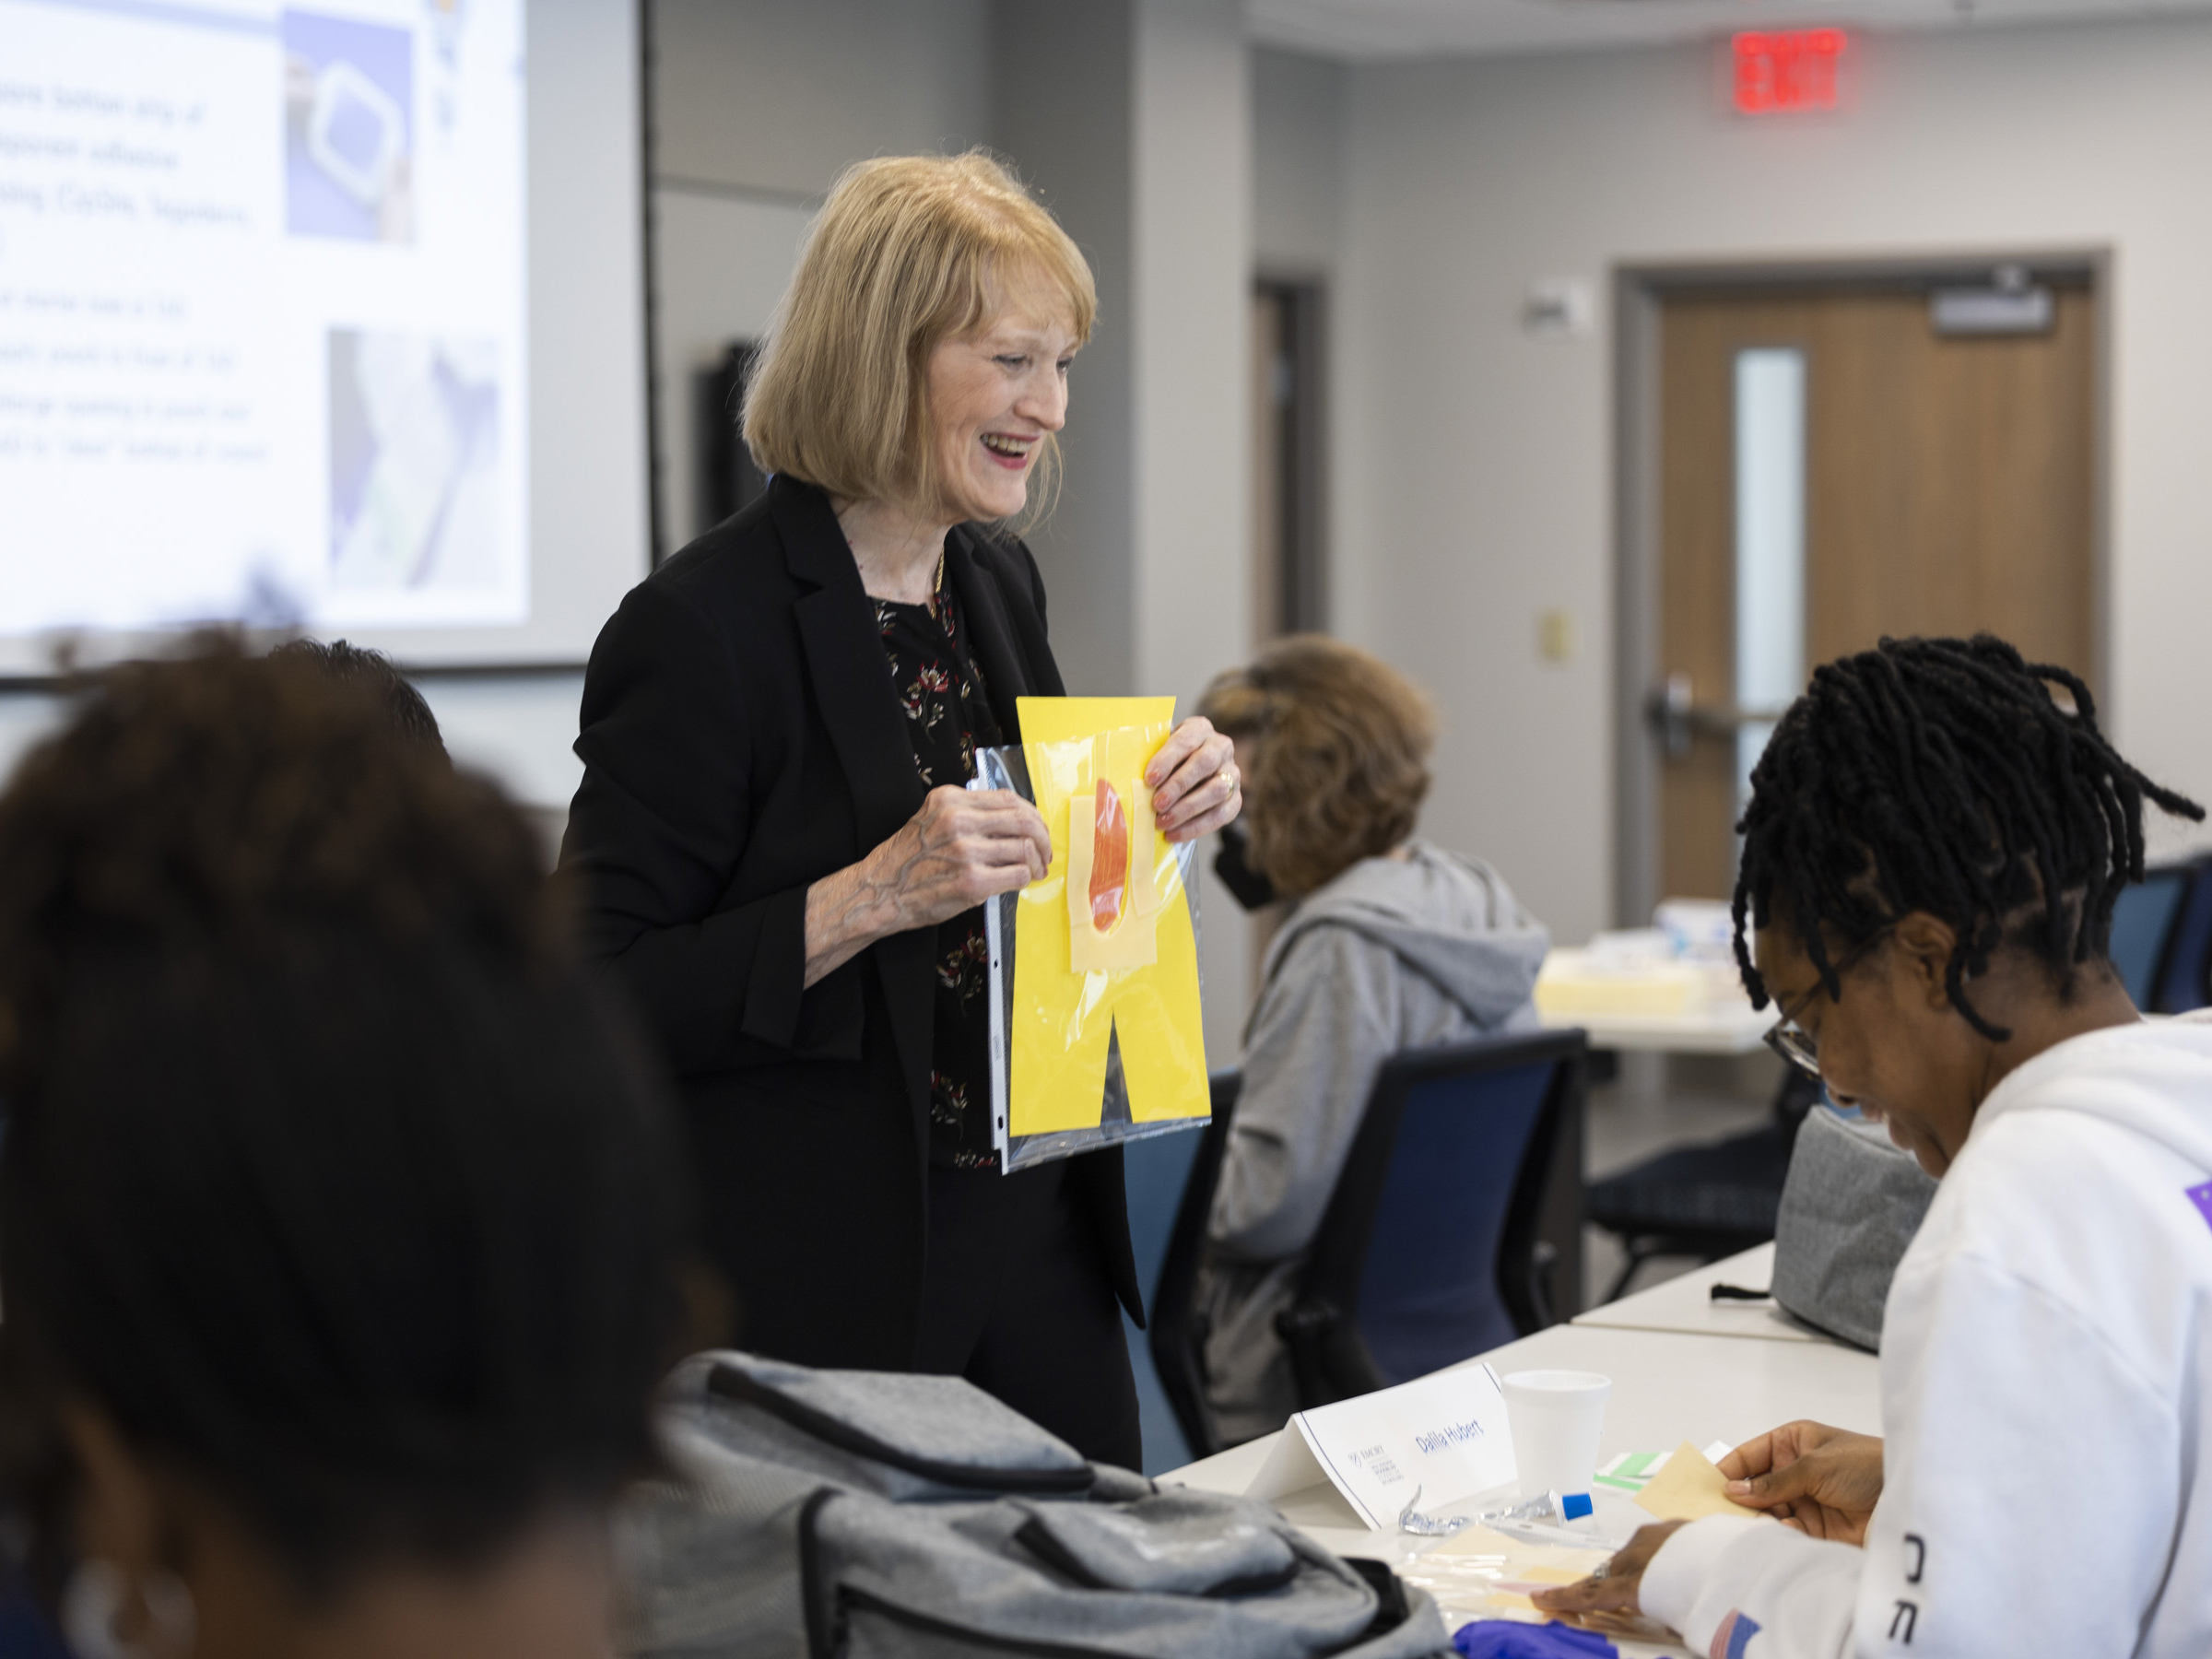 Dorothy Doughty leads a professional development course in the Emory Nursing Experience.